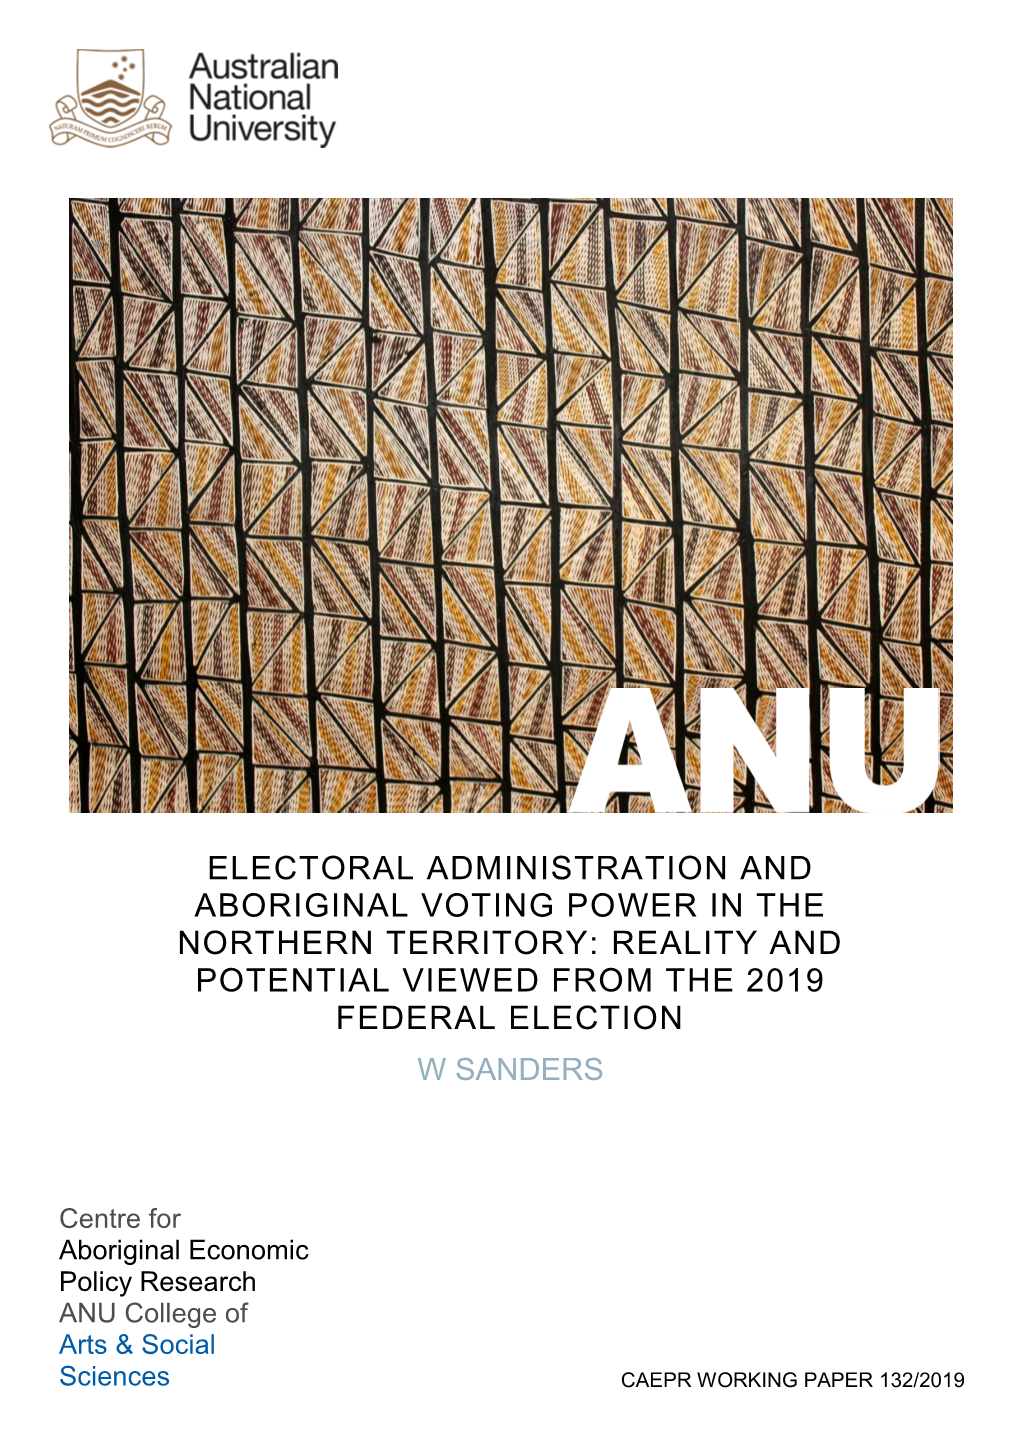 Electoral Administration and Aboriginal Voting Power in the Northern Territory: Reality and Potential Viewed from the 2019 Federal Election W Sanders